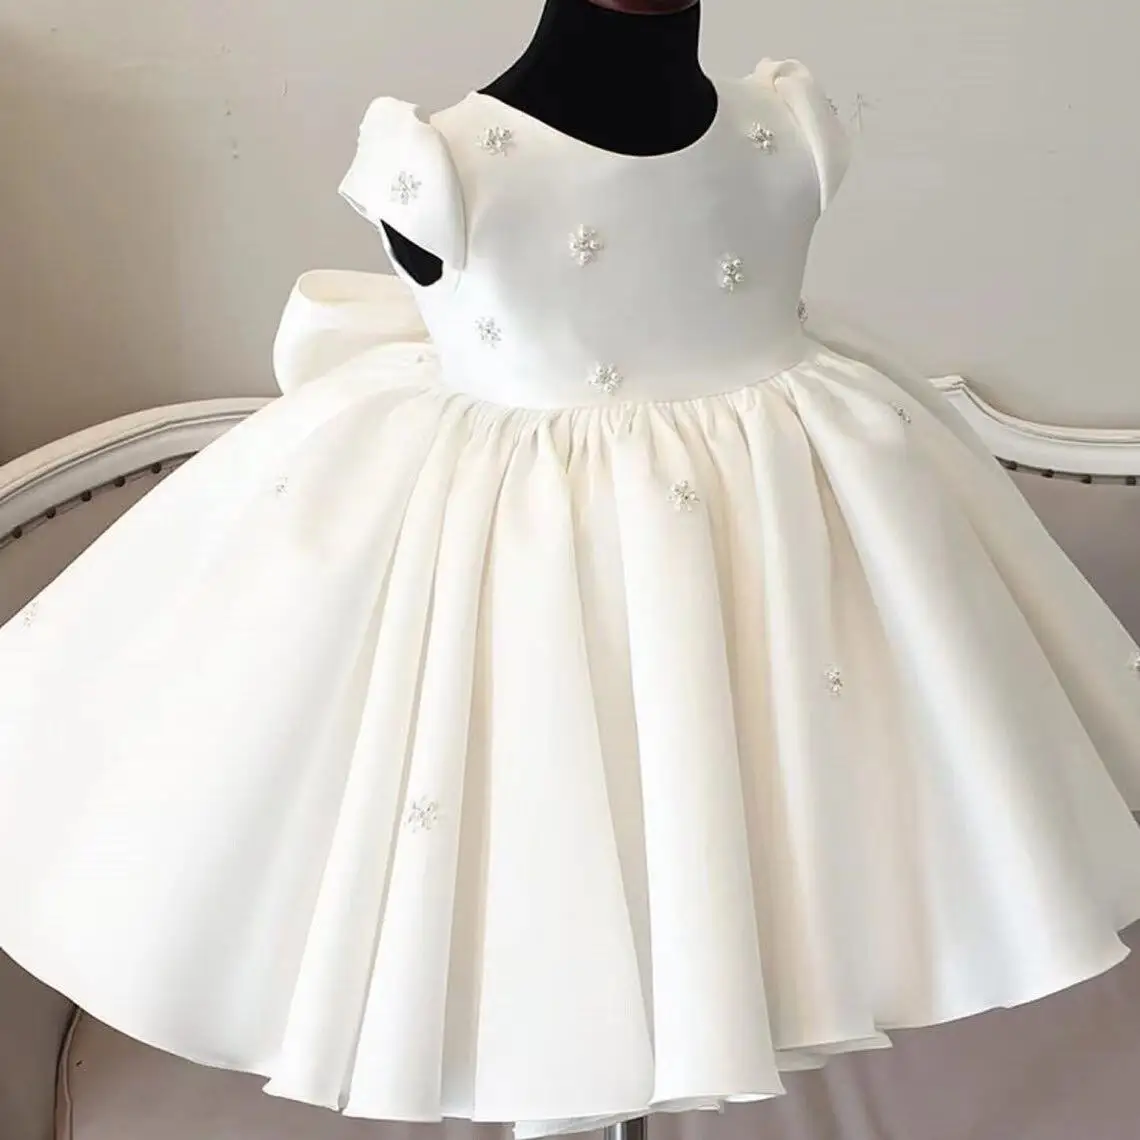 

Baby Baptism Dress Princess Bridesmaid Kids Dress For Girls Elegant Bow Girls Dress For Party And Wedding Baby Christening Gown